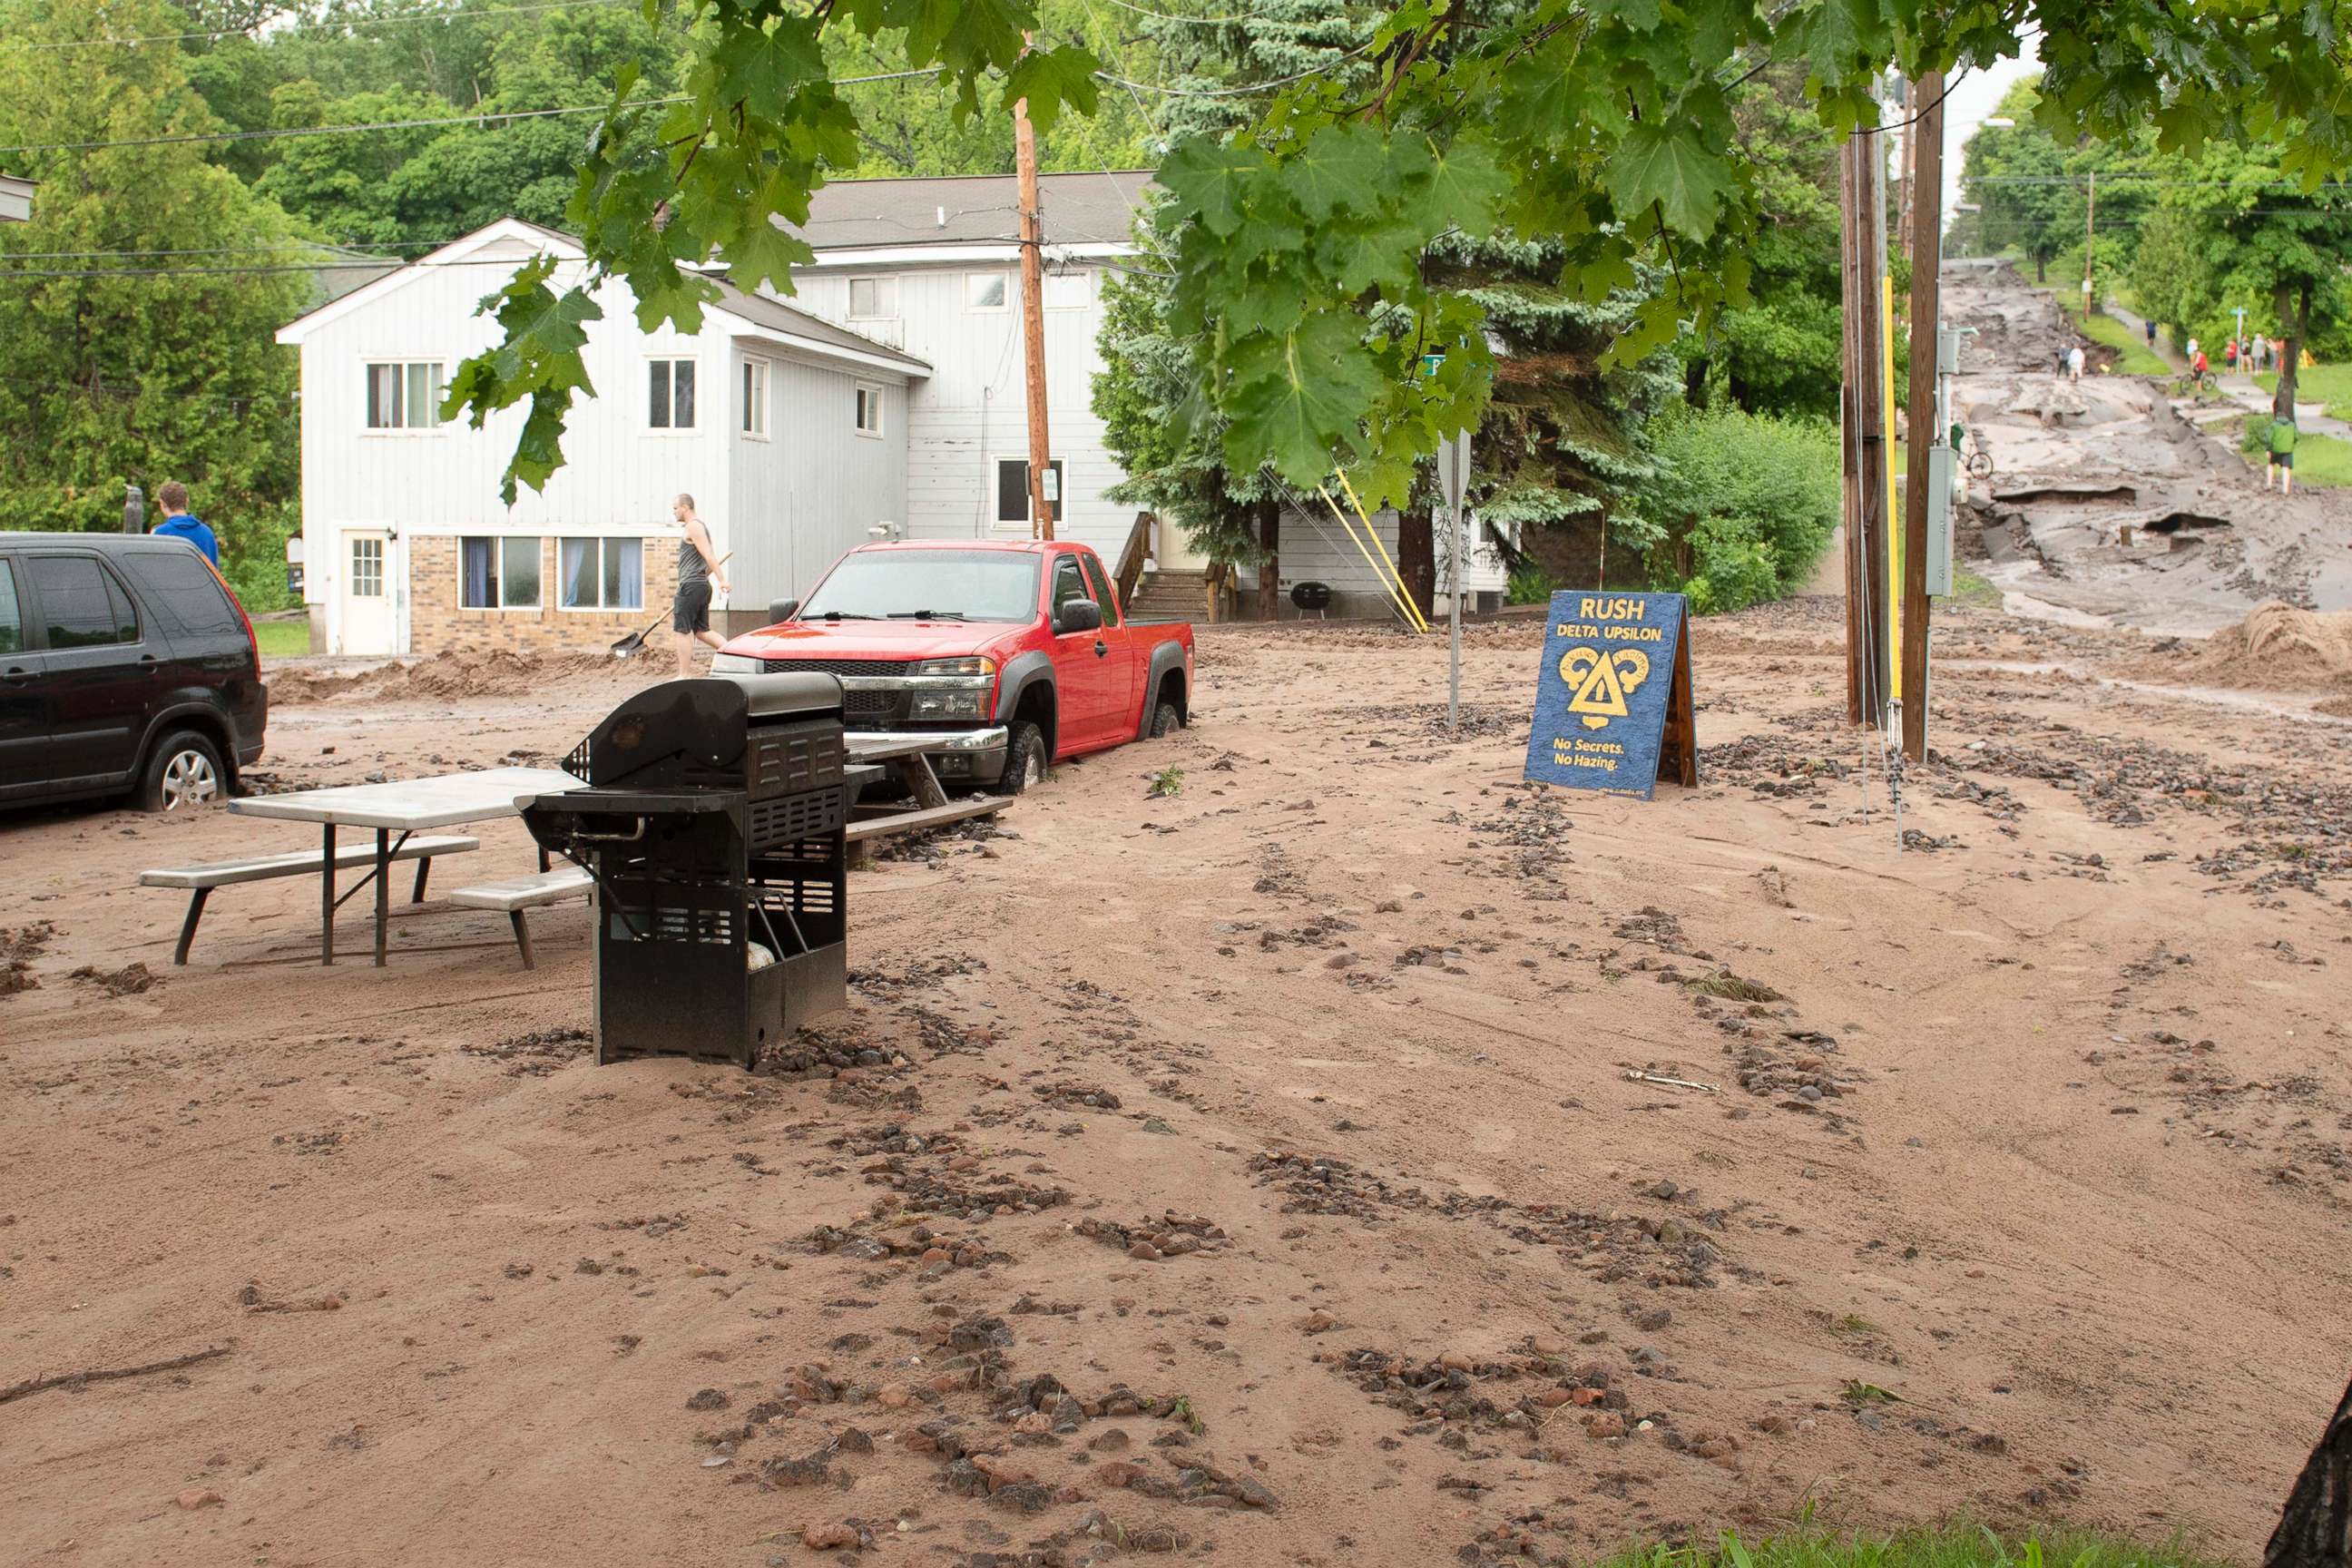 PHOTO: In this photo taken June 17, 2018, Agate Street is washed out wth dirt and debris covering the vehicles in Houghton, Mich.